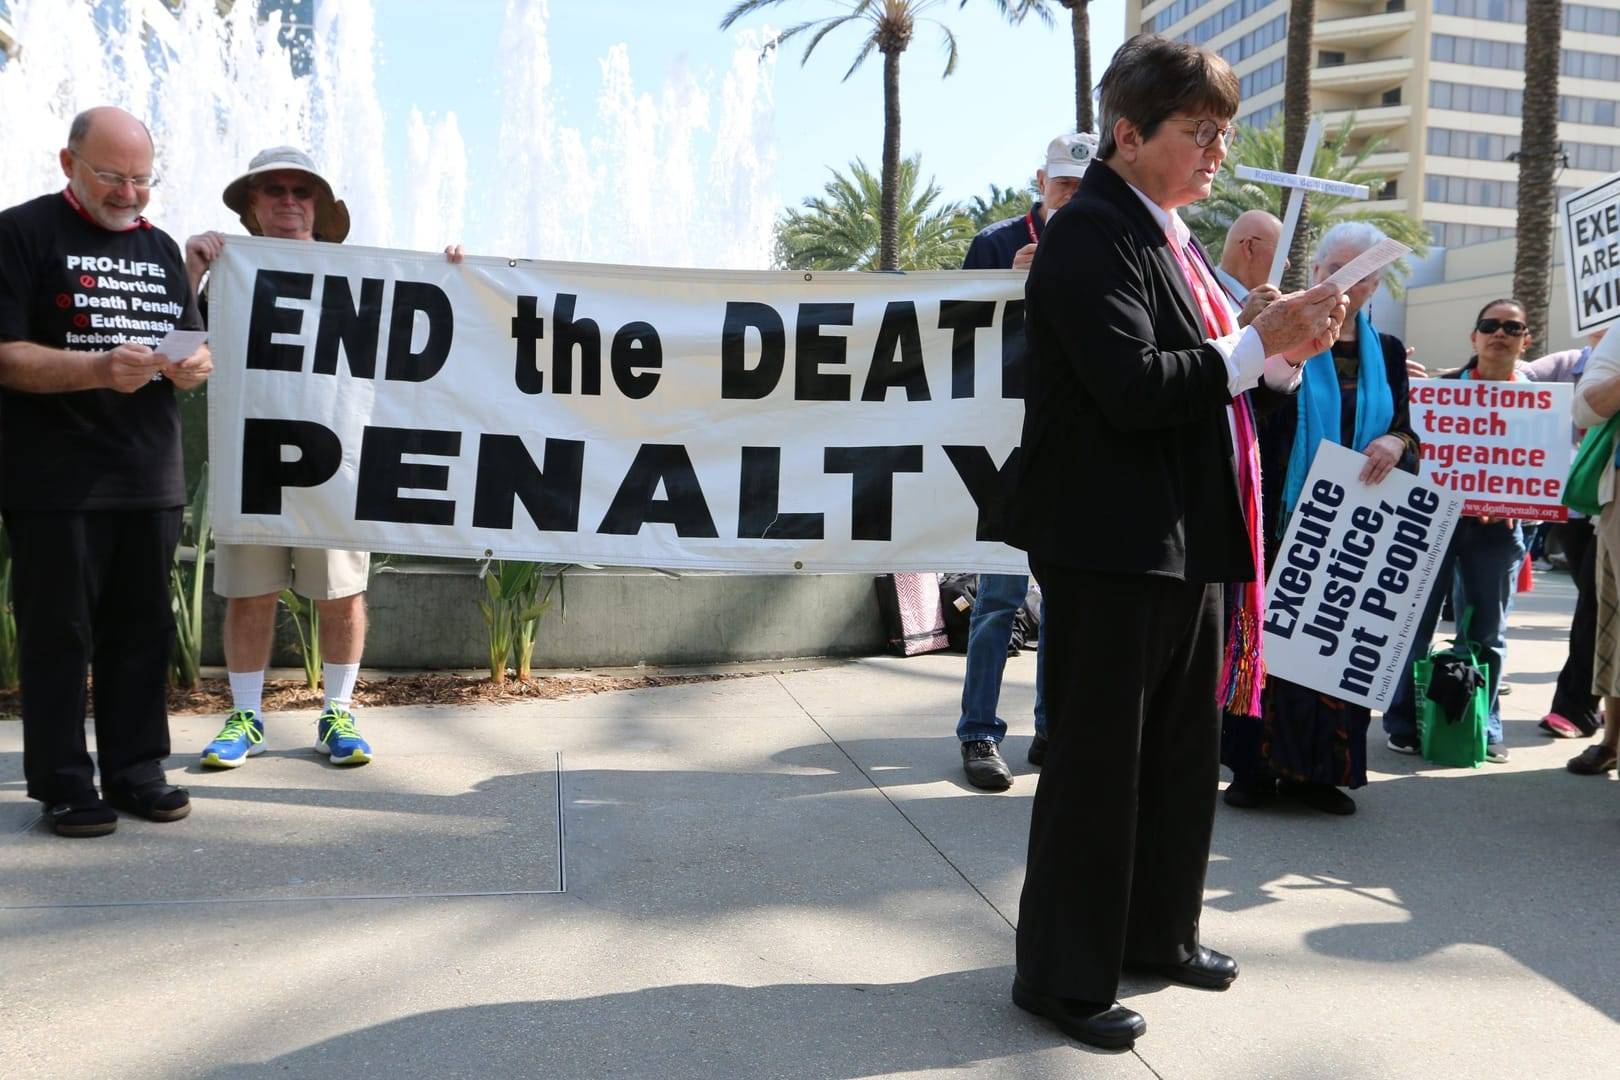 Sister Helen Prejean, a Sister of St. Joseph, is seen in Anaheim, Calif., calling for an end to the death penalty in this 2016 file photo. (Credit: J.D. Long-Garcia/The Tidings via CNS.)